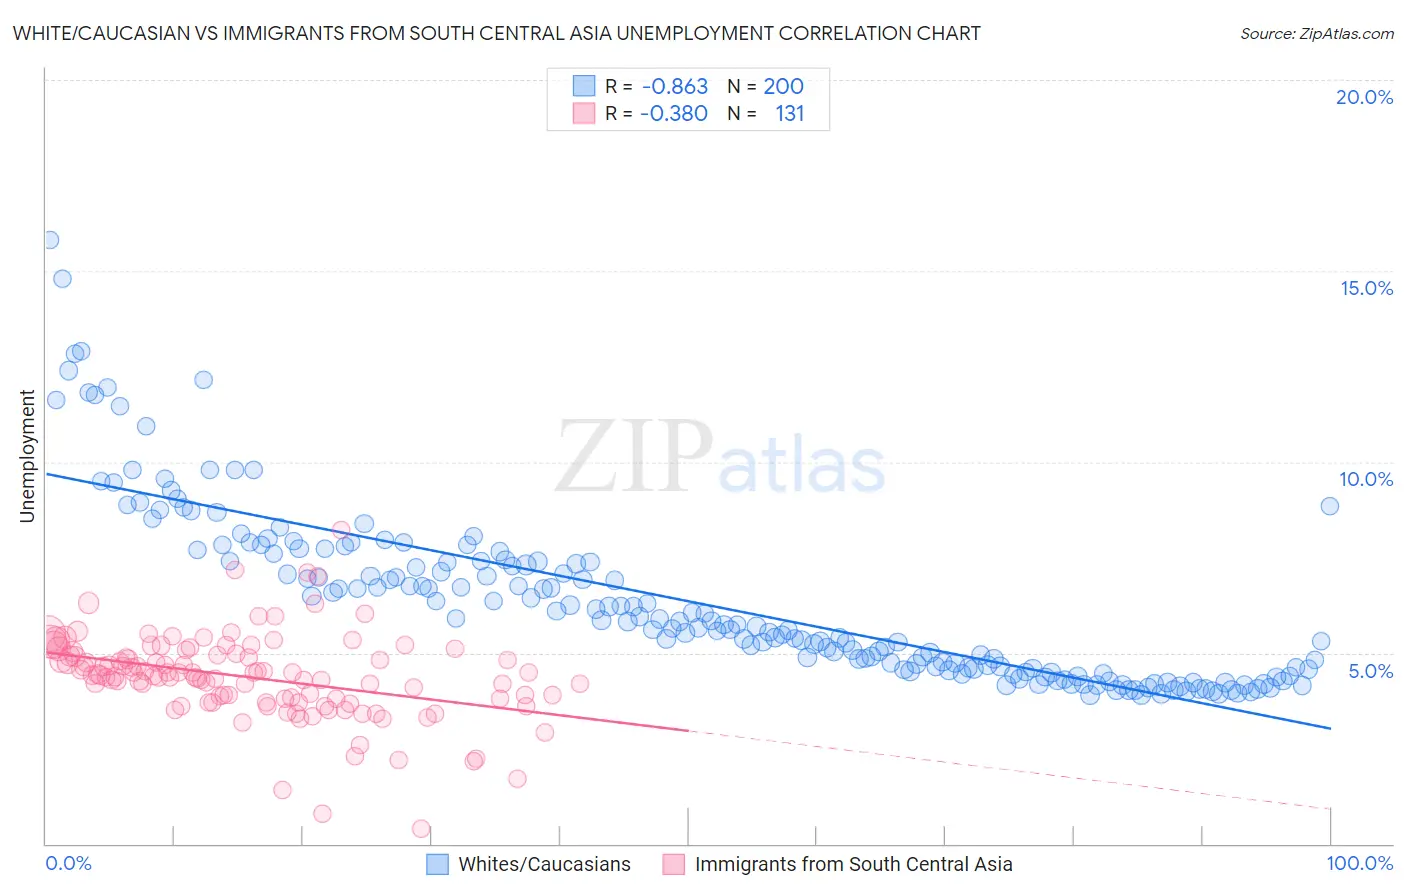 White/Caucasian vs Immigrants from South Central Asia Unemployment